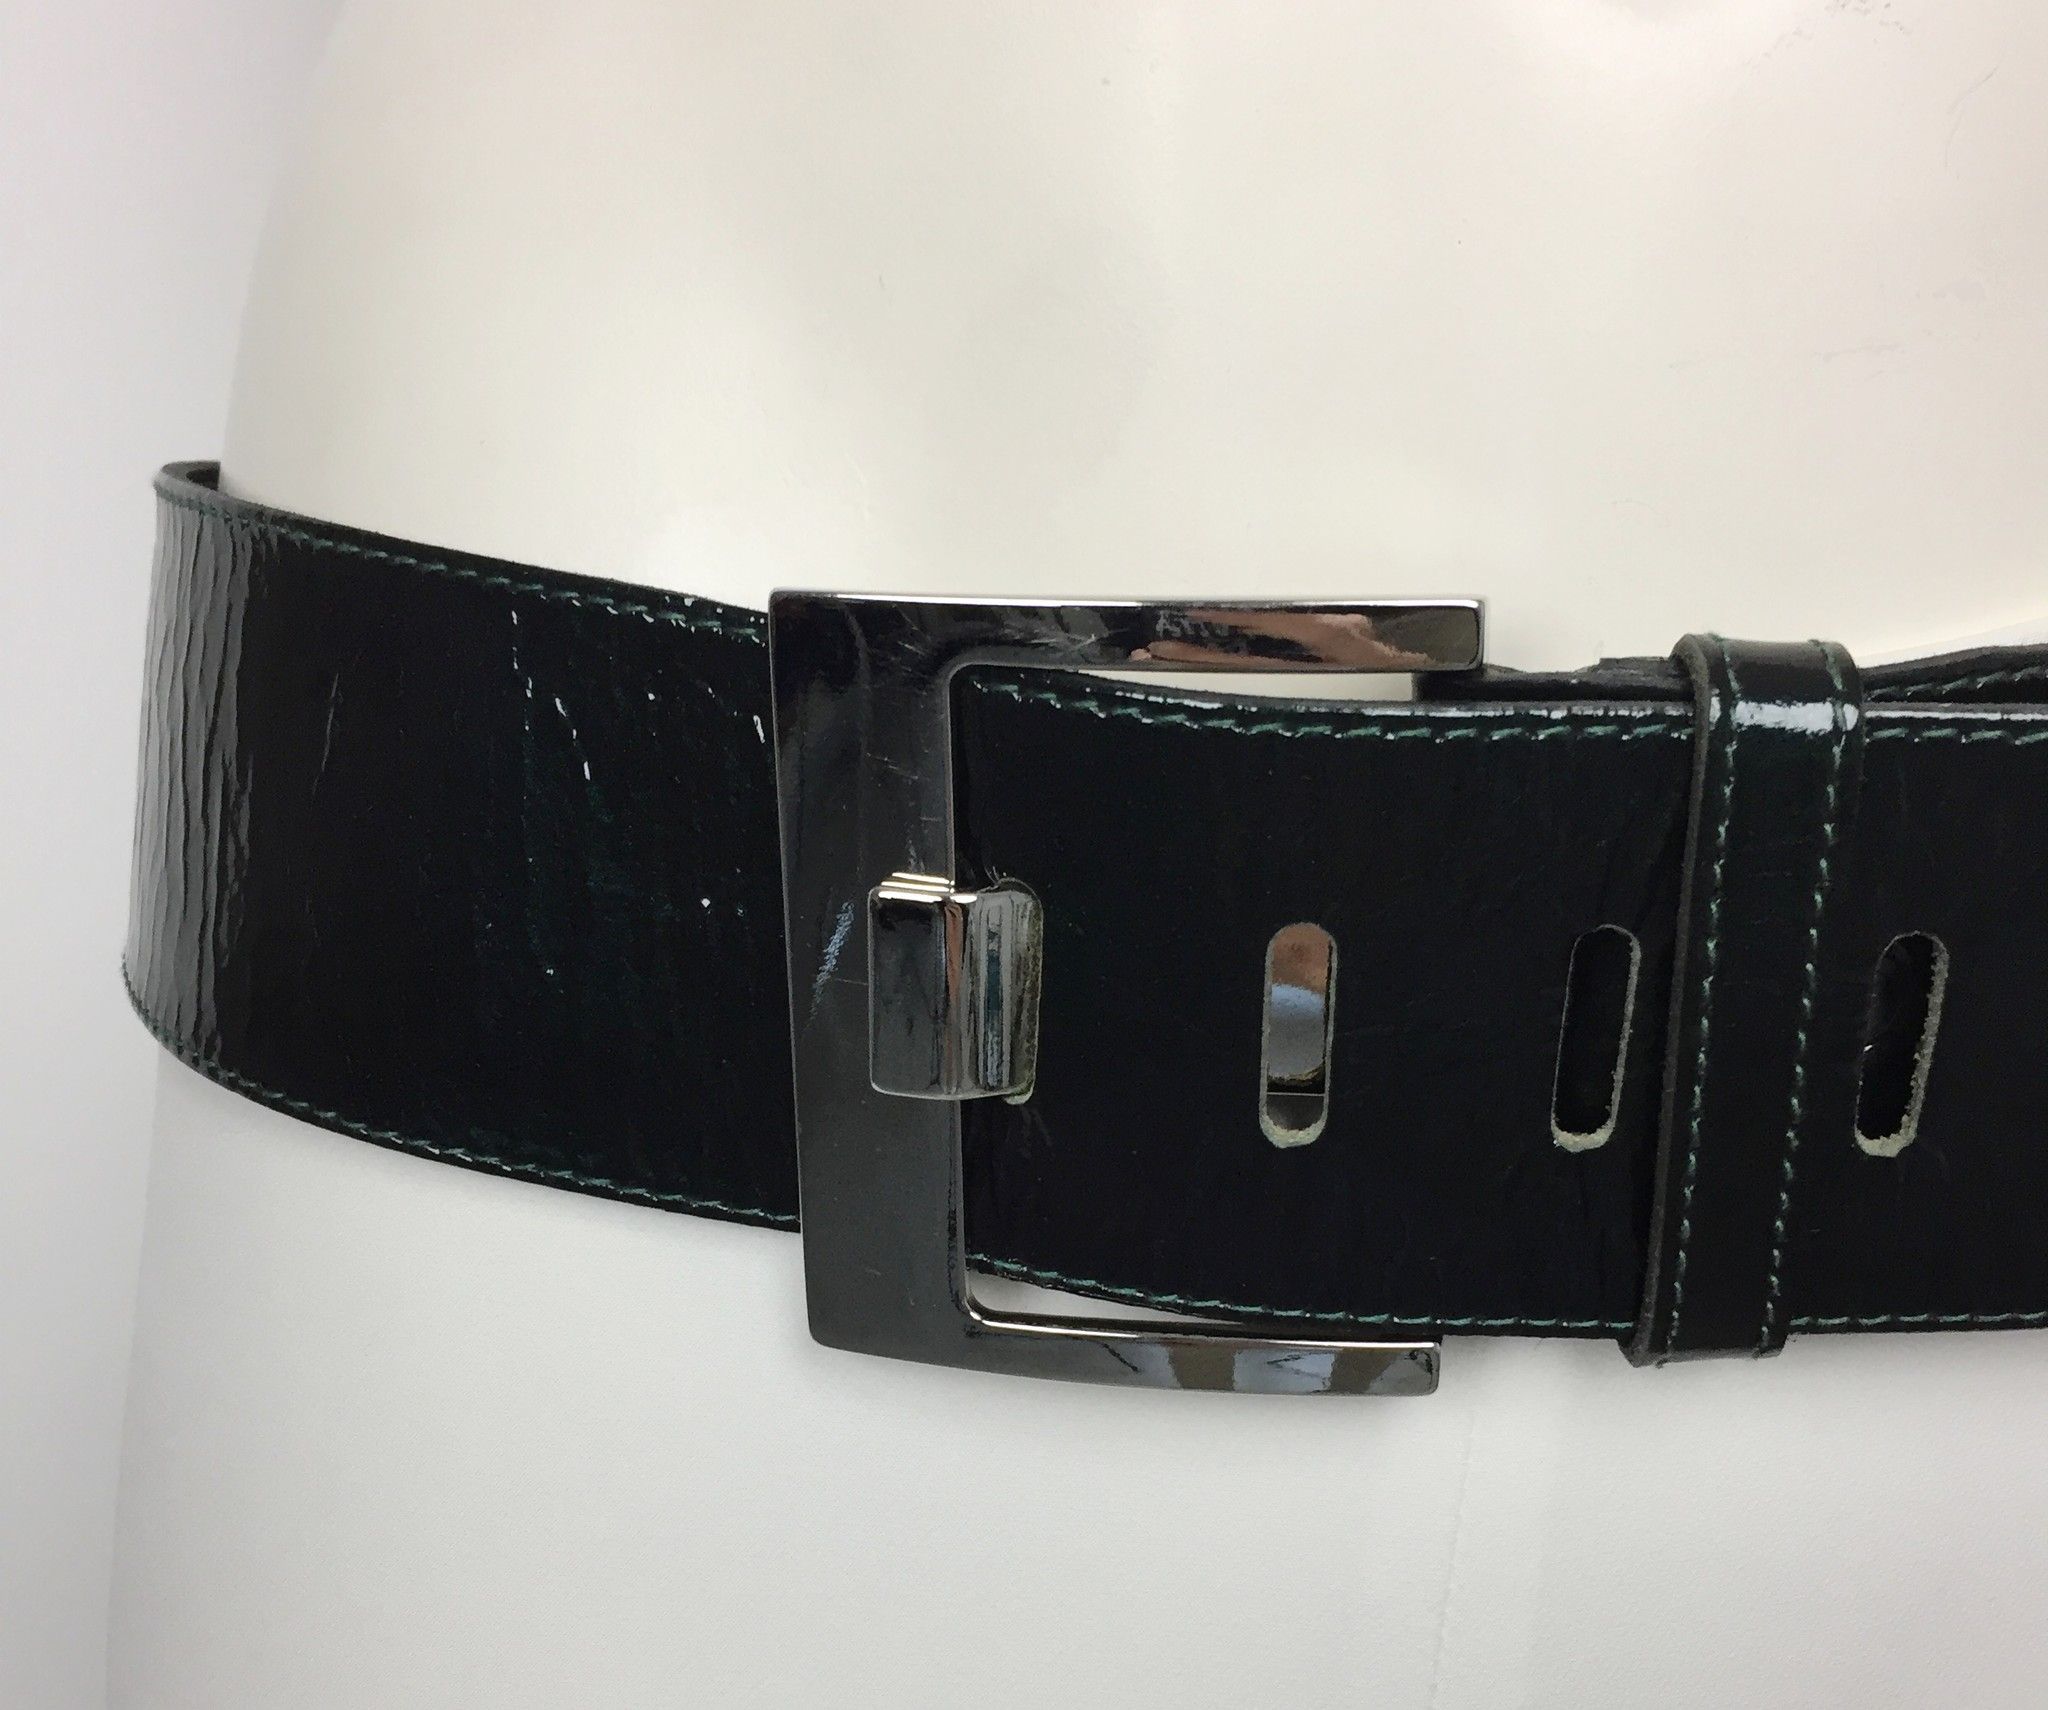 LadyBug Leather Belt with Stainless Steel Buckle Cod.9845